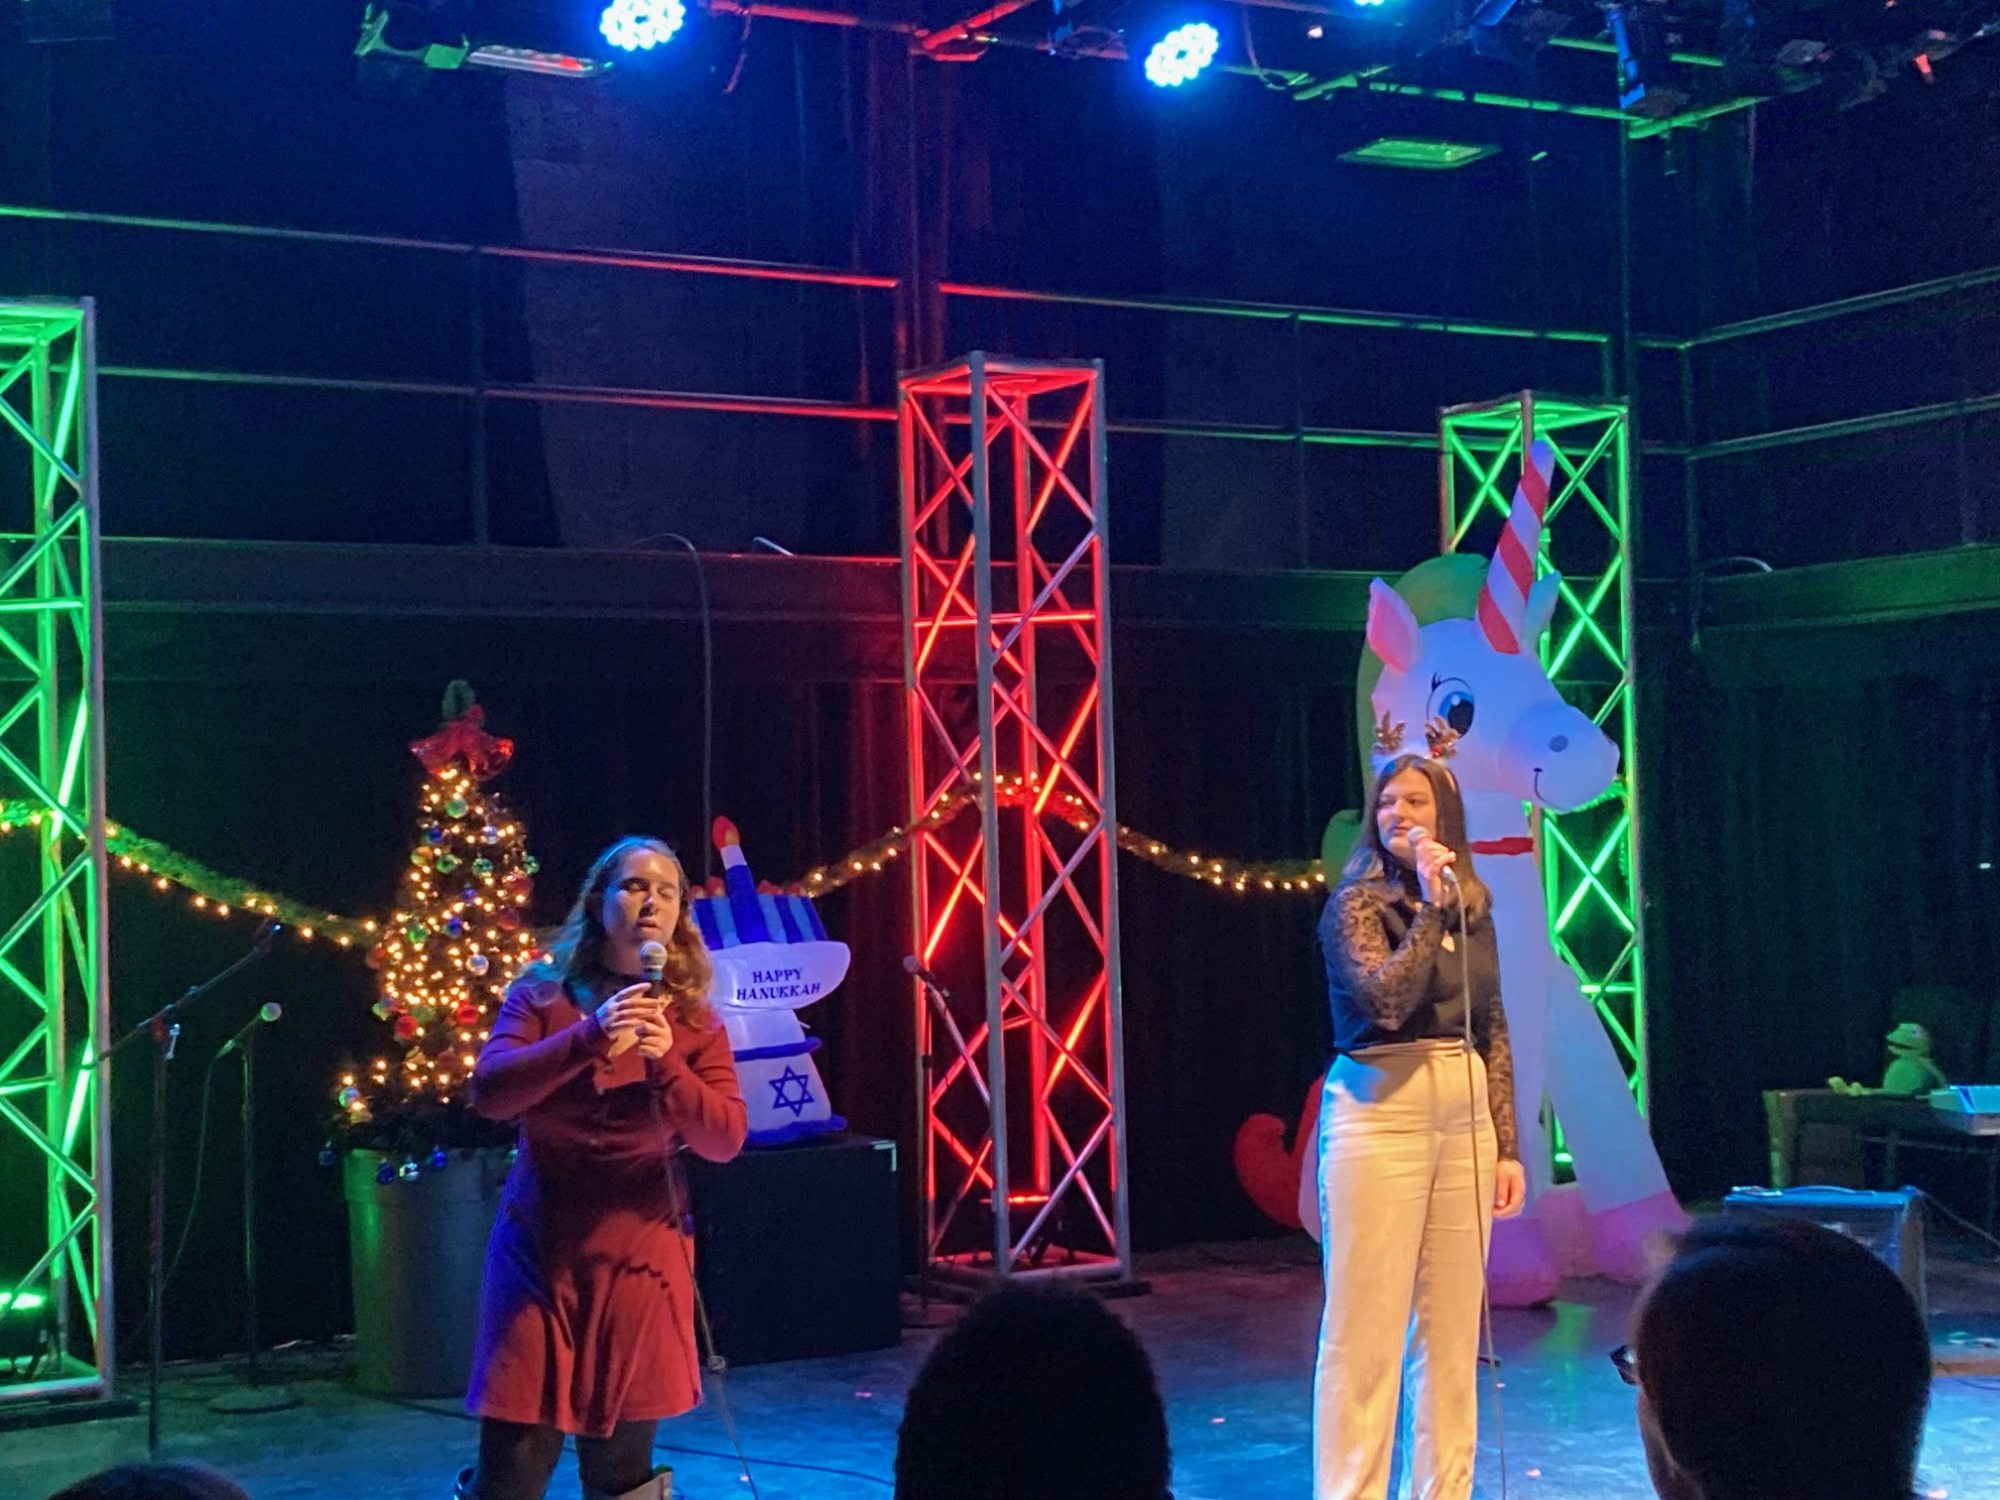 Two singers performing in front of holiday decortations